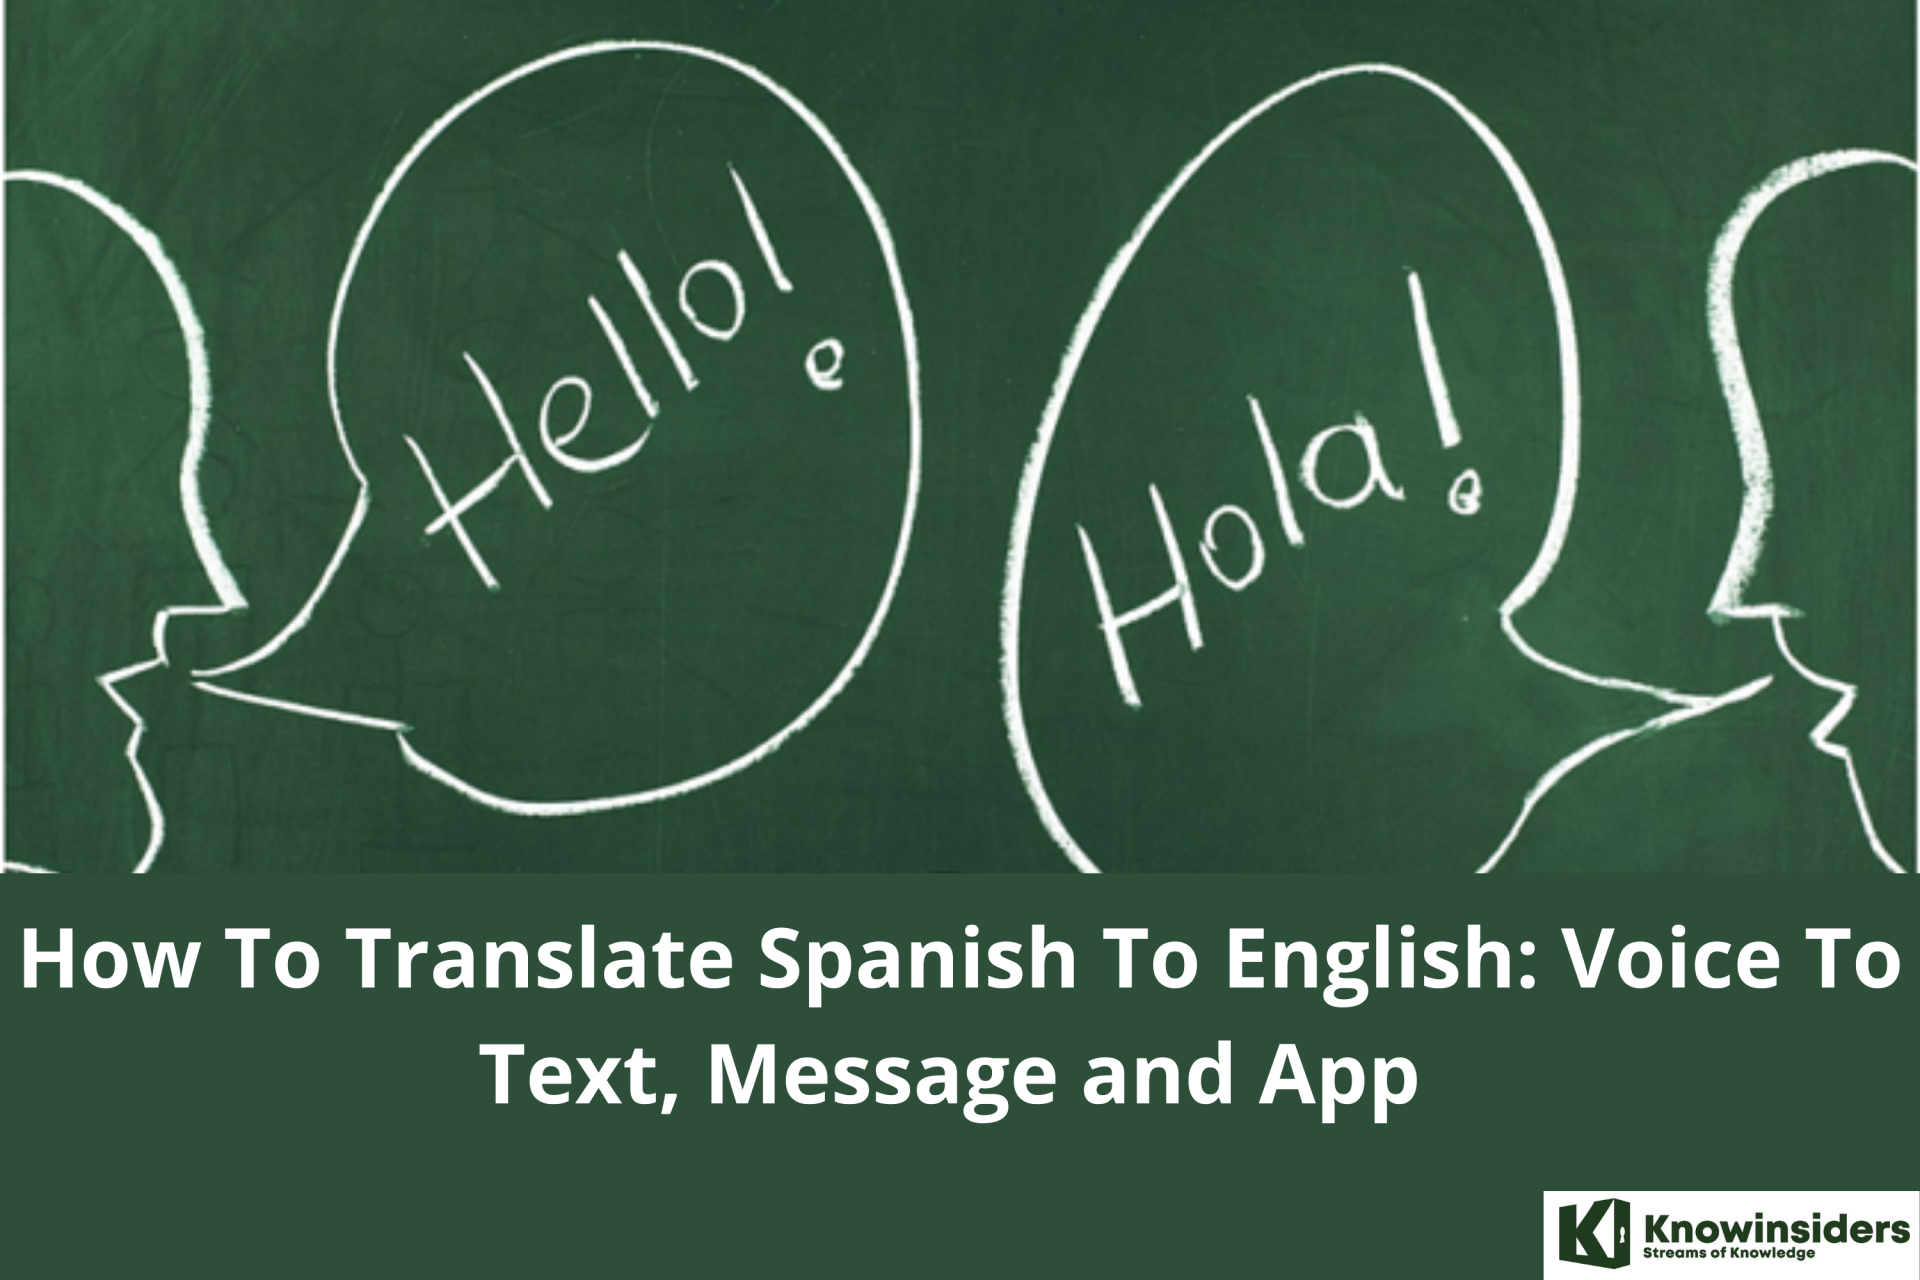 How To Translate Spanish To English: Voice To Text, Message and App 